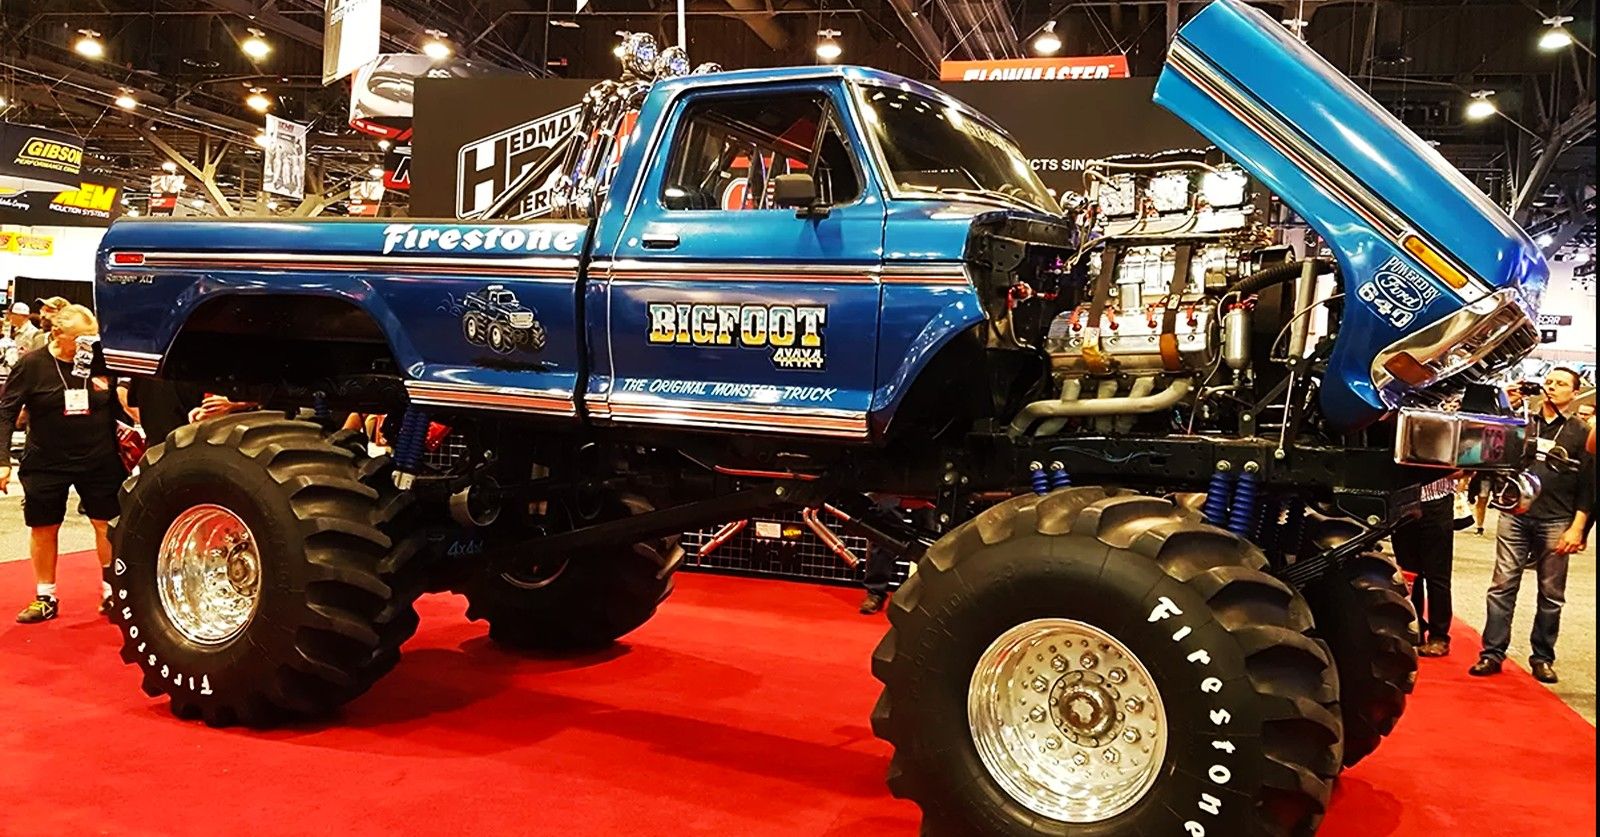 Bigfoot is real! Driving the original monster truck